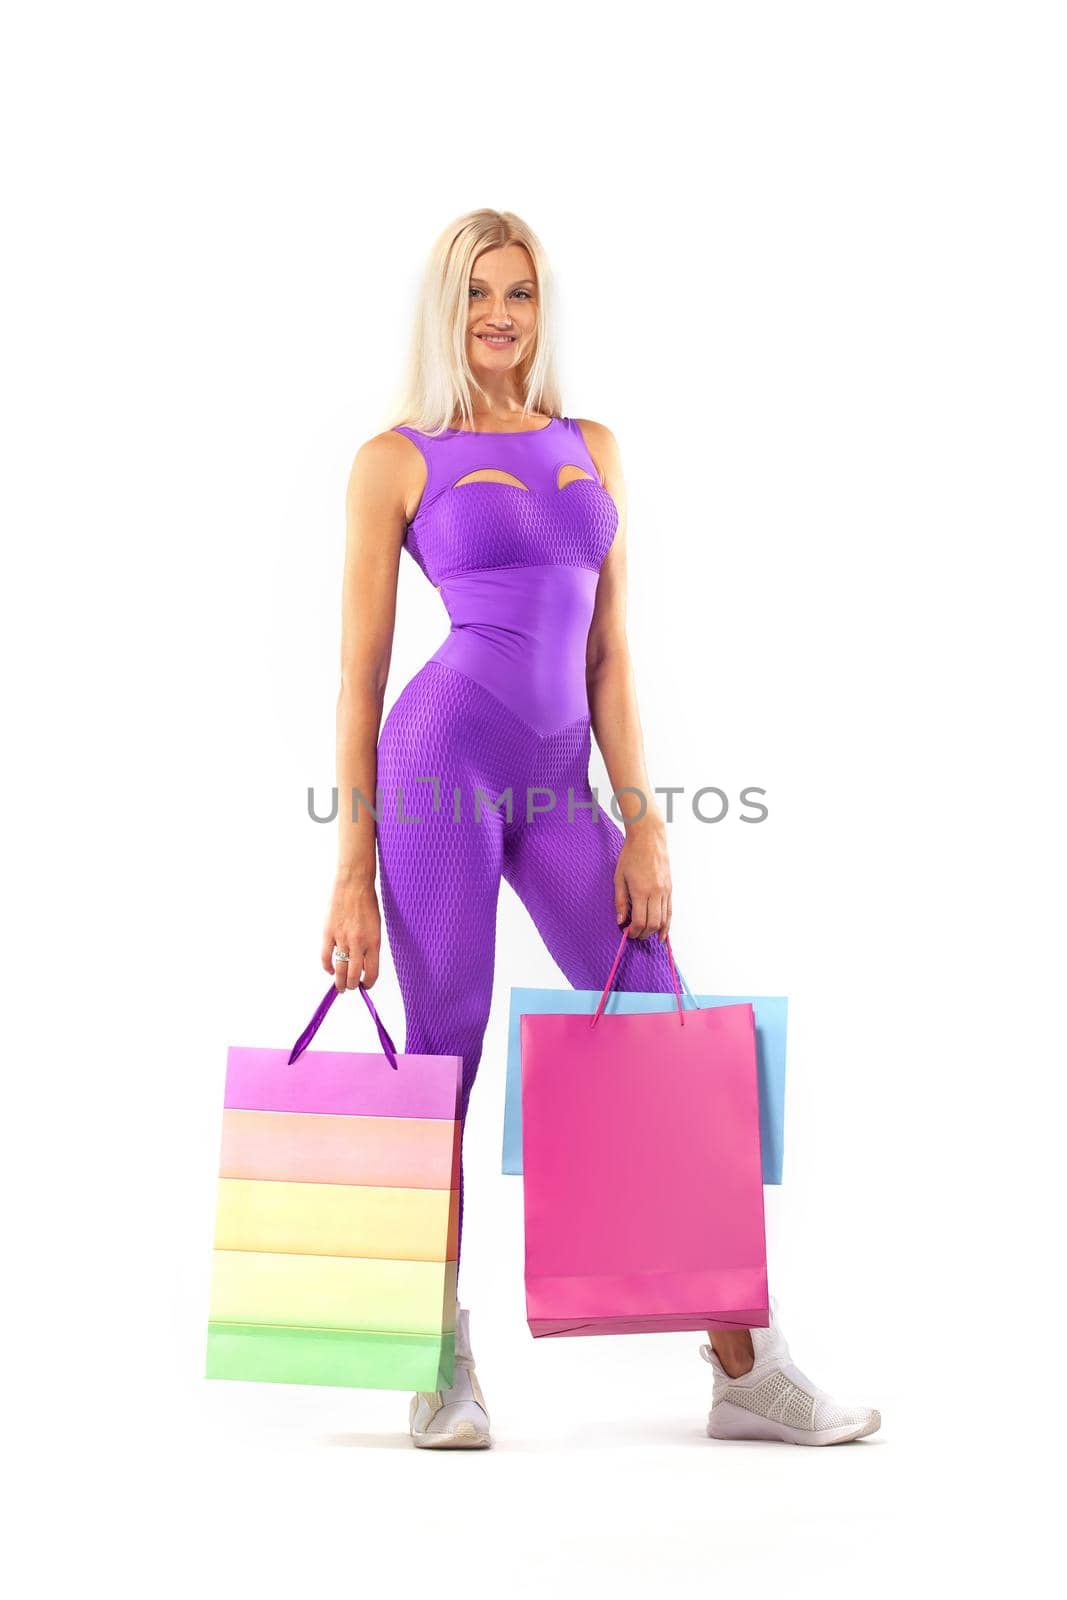 Black friday sale concept for fitness shops. Shopping woman athlete holding color bag isolated on yellow background in holiday by MikeOrlov